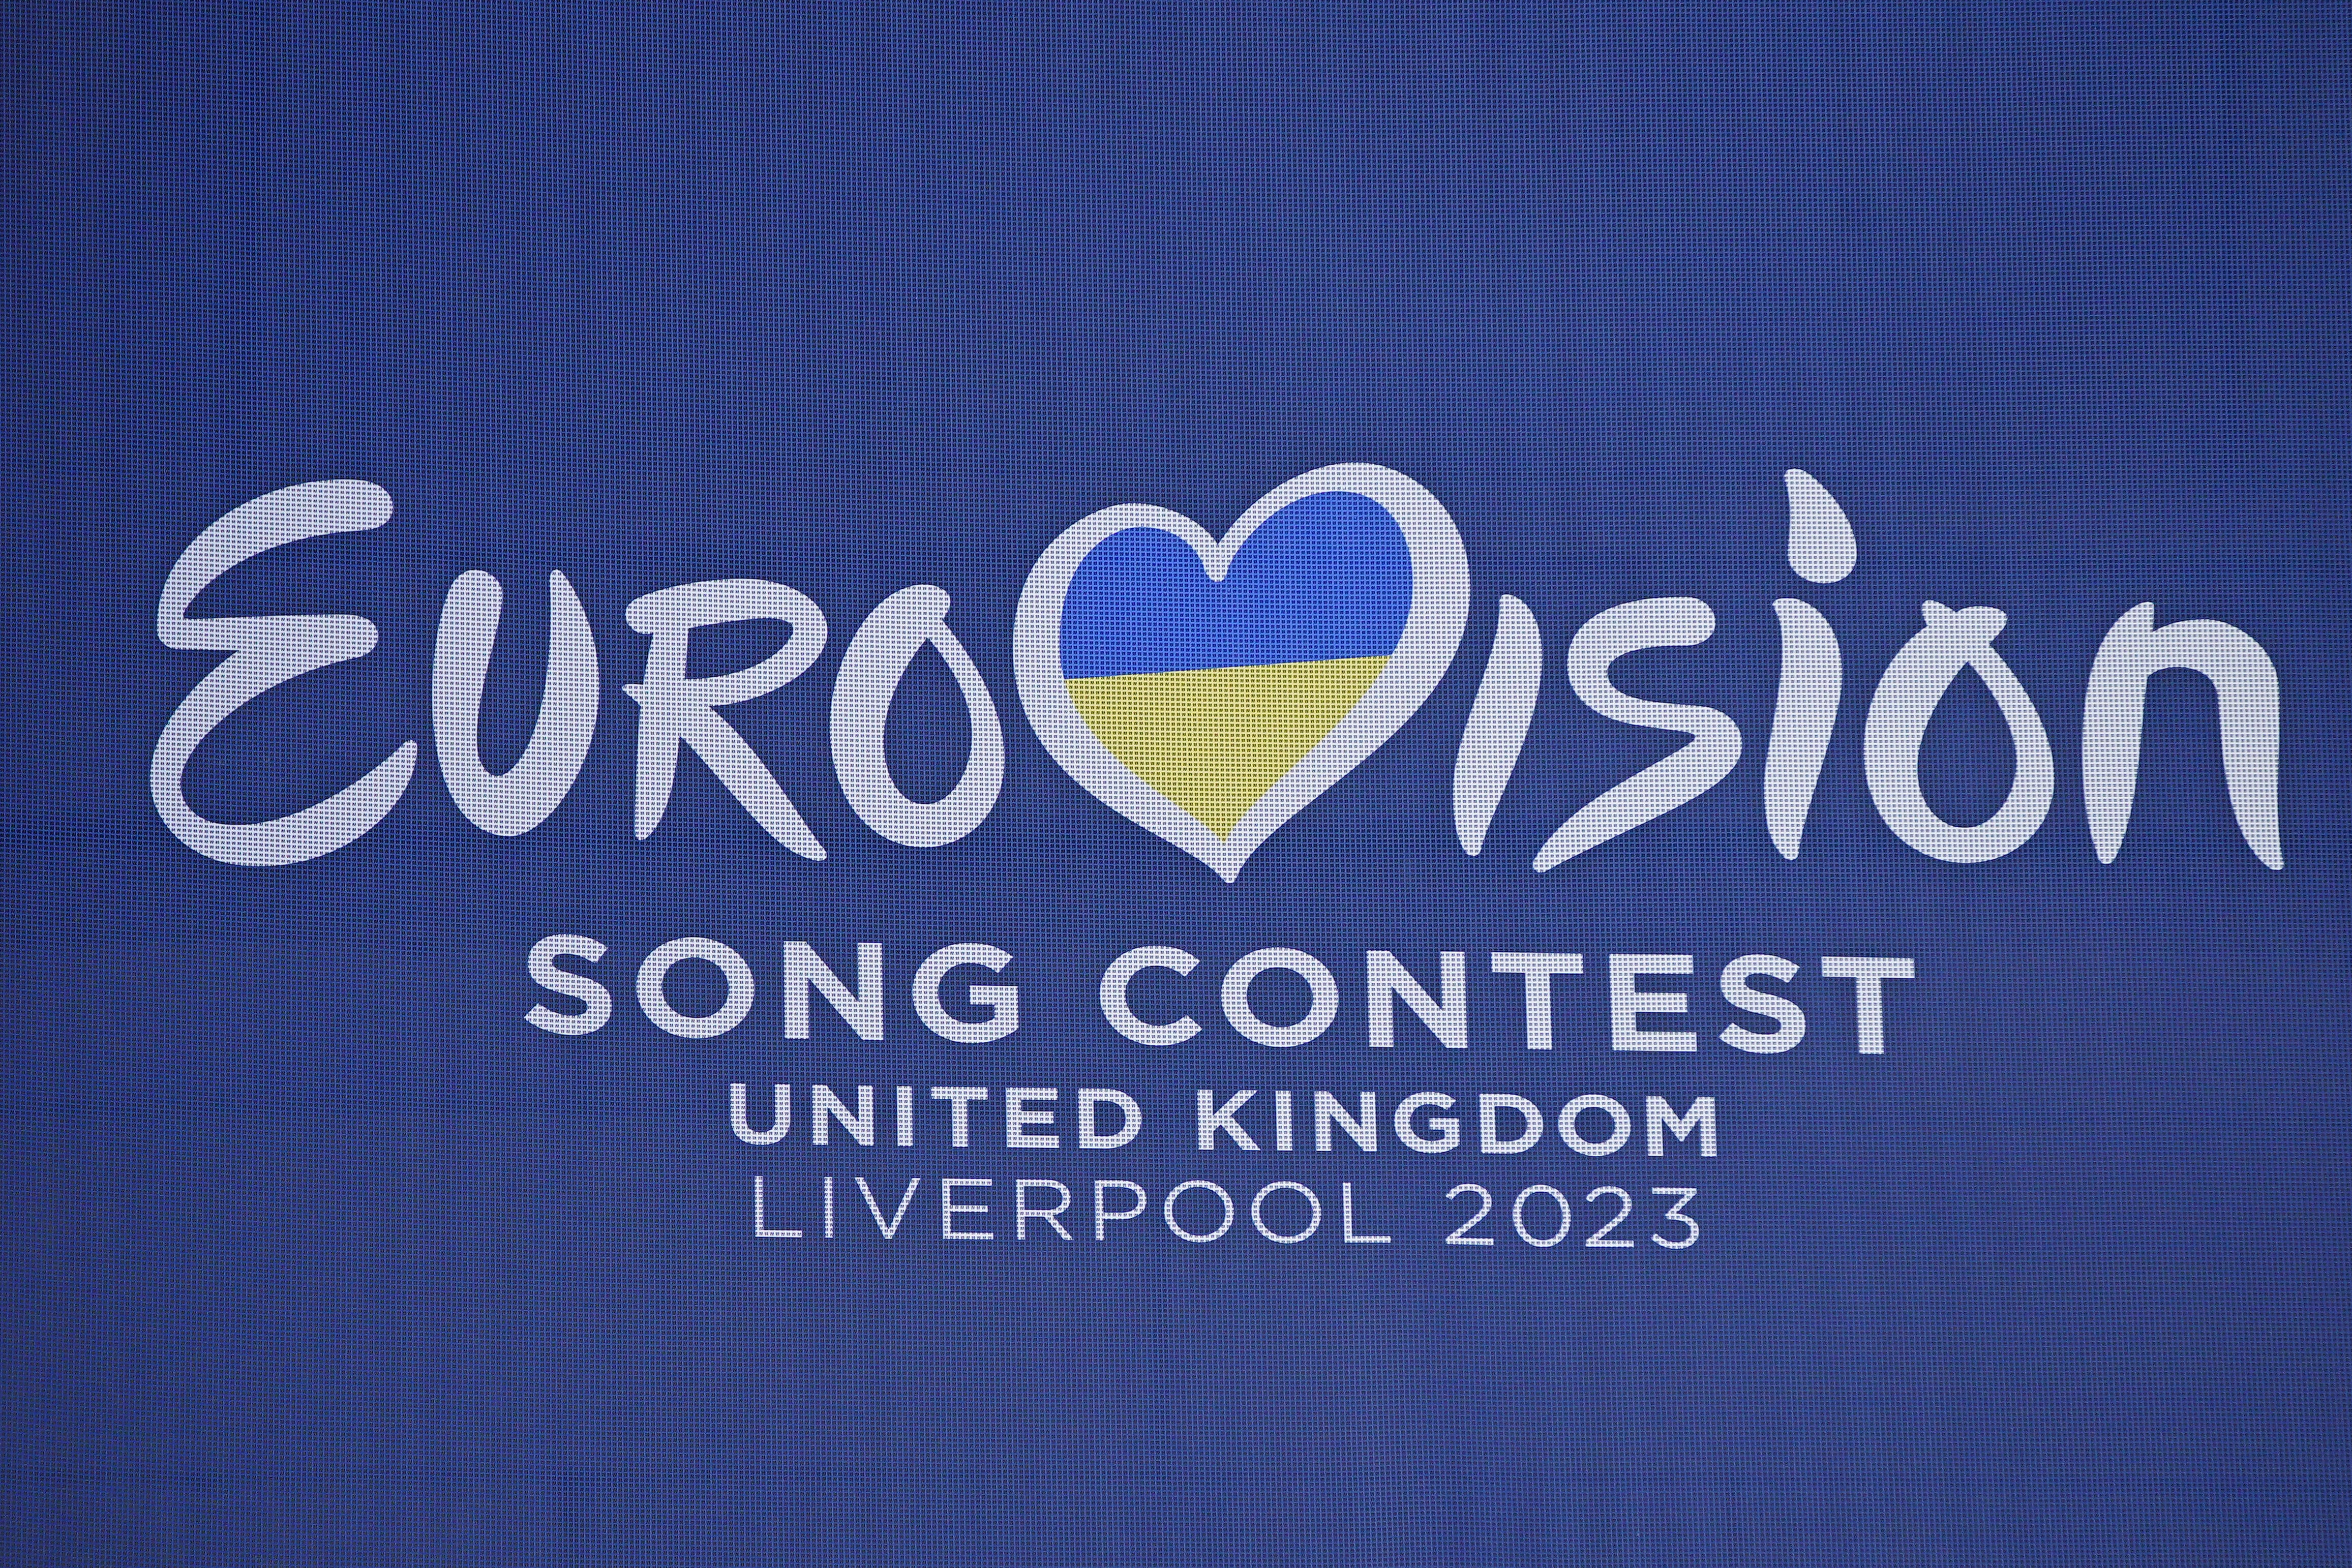 Eurovision Song Contest branding at St George’s Hall in Liverpool (PA)